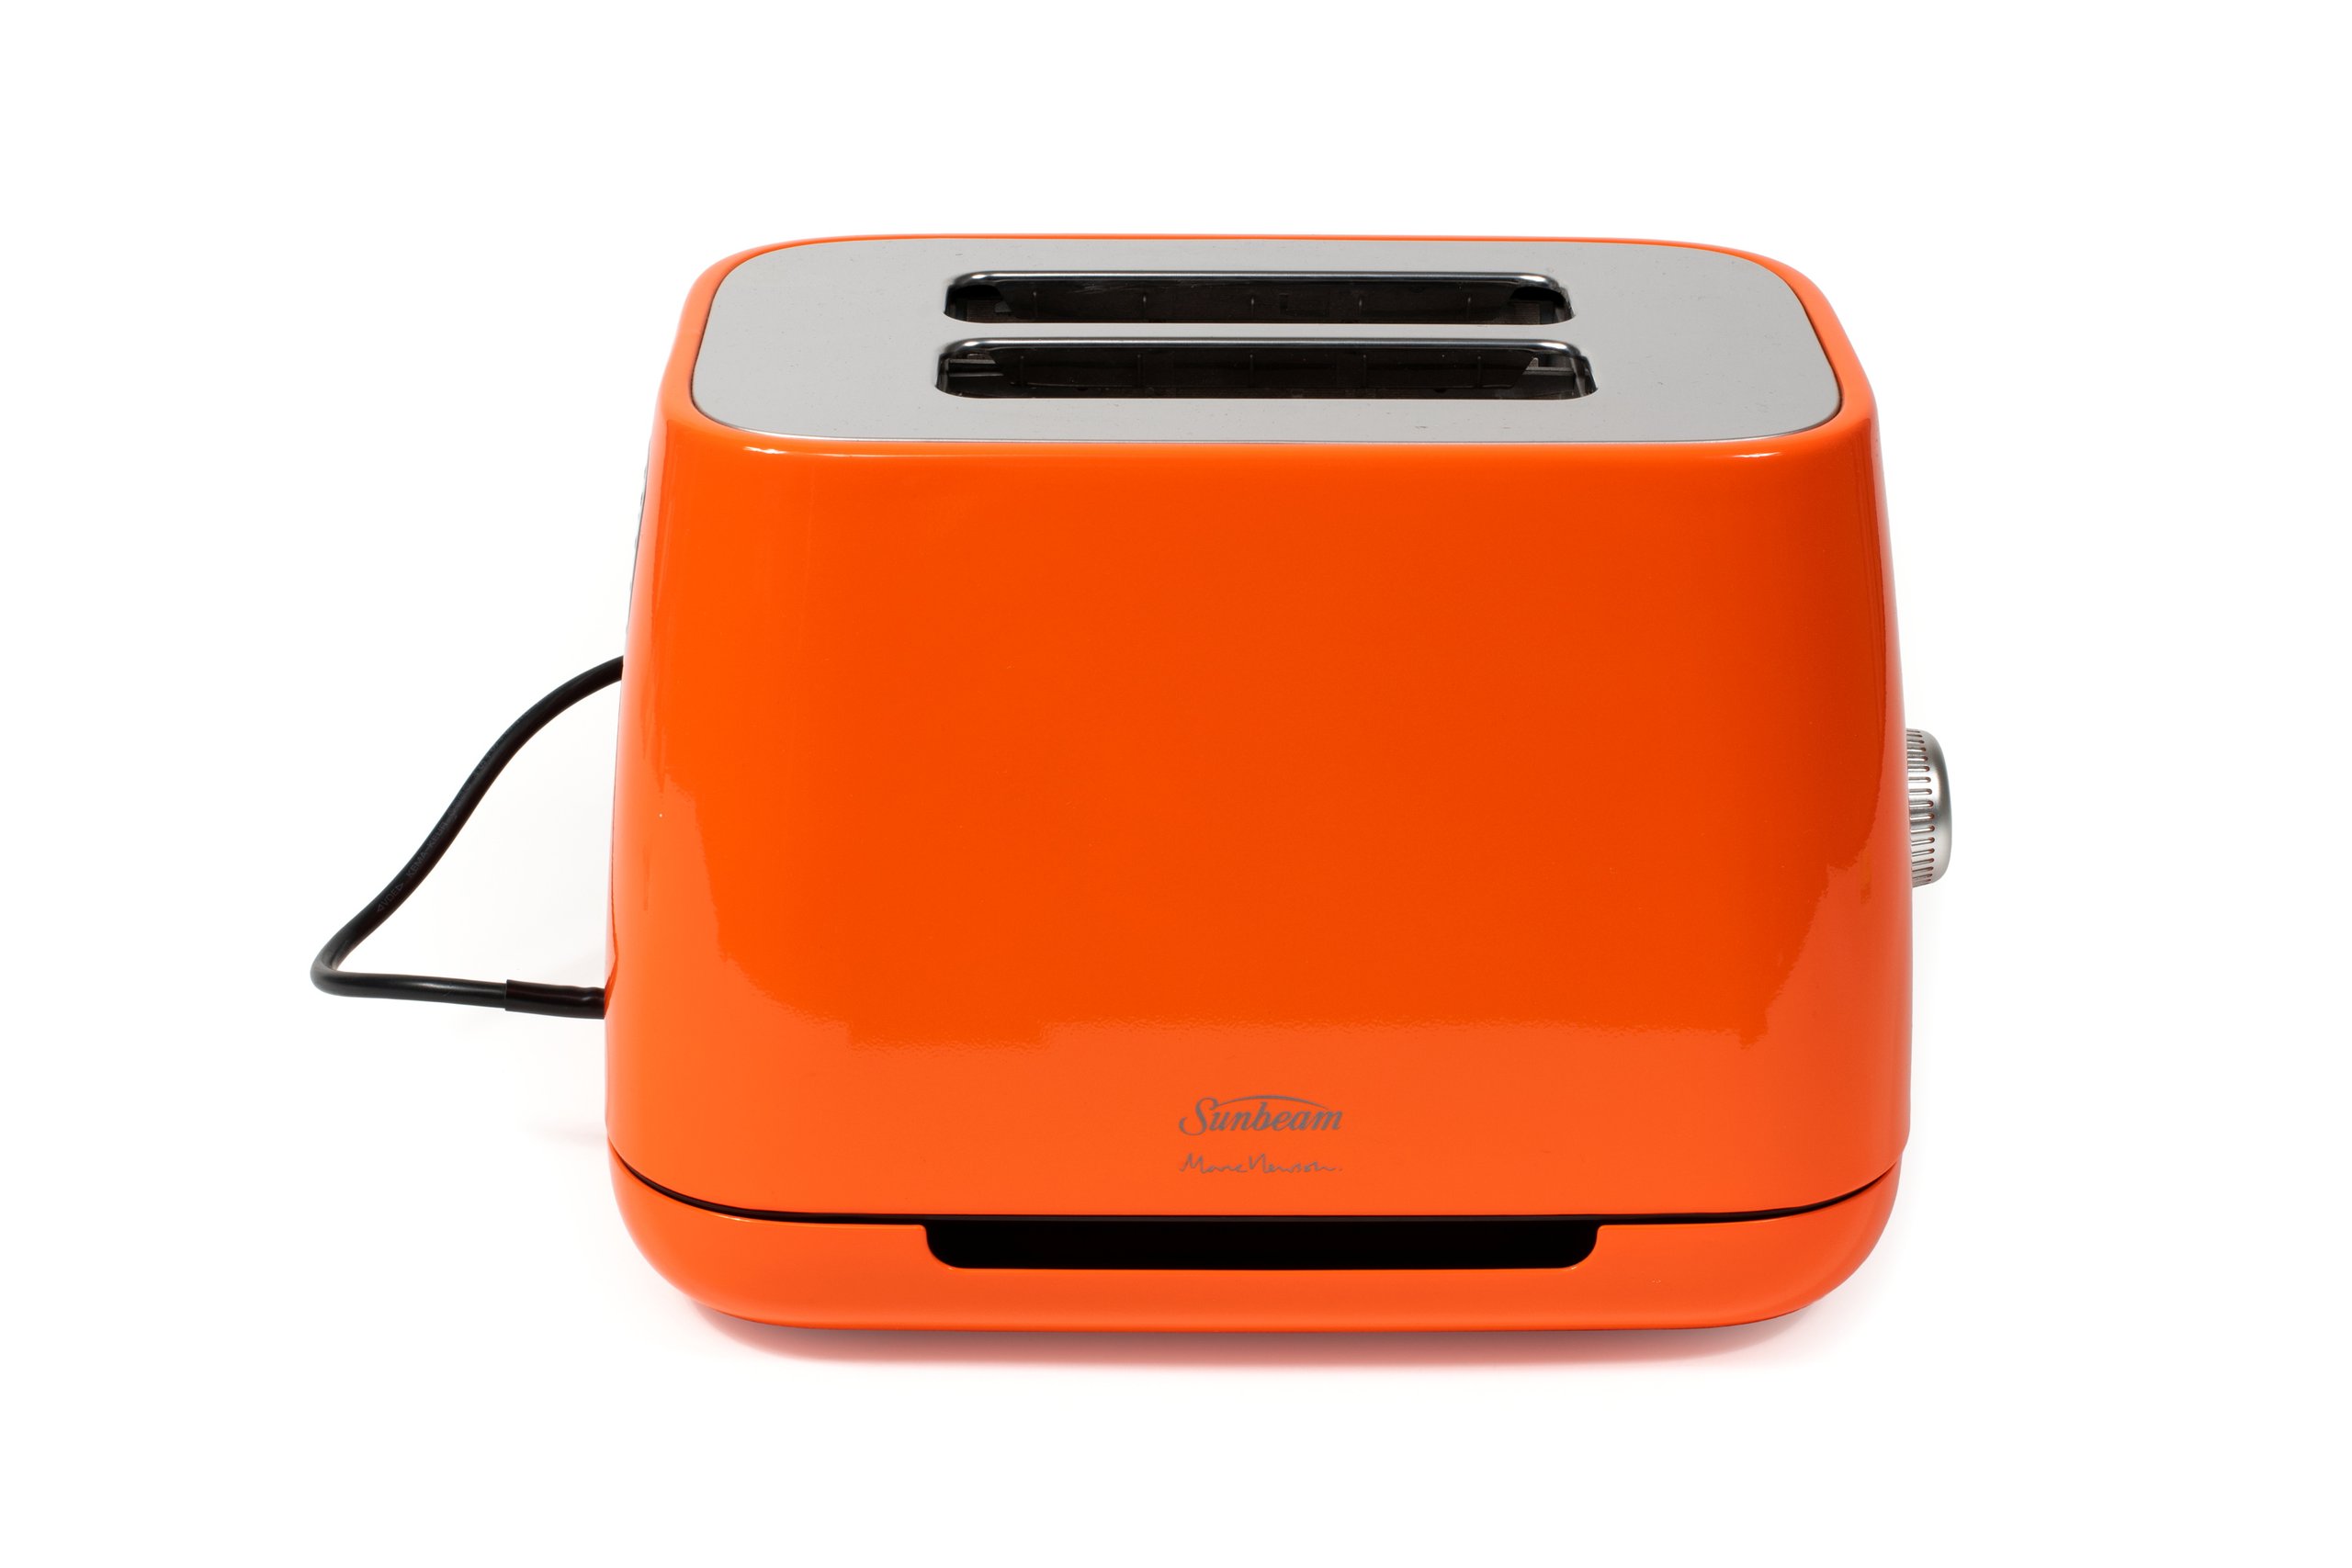 Toaster designed by Marc Newson for Sunbeam